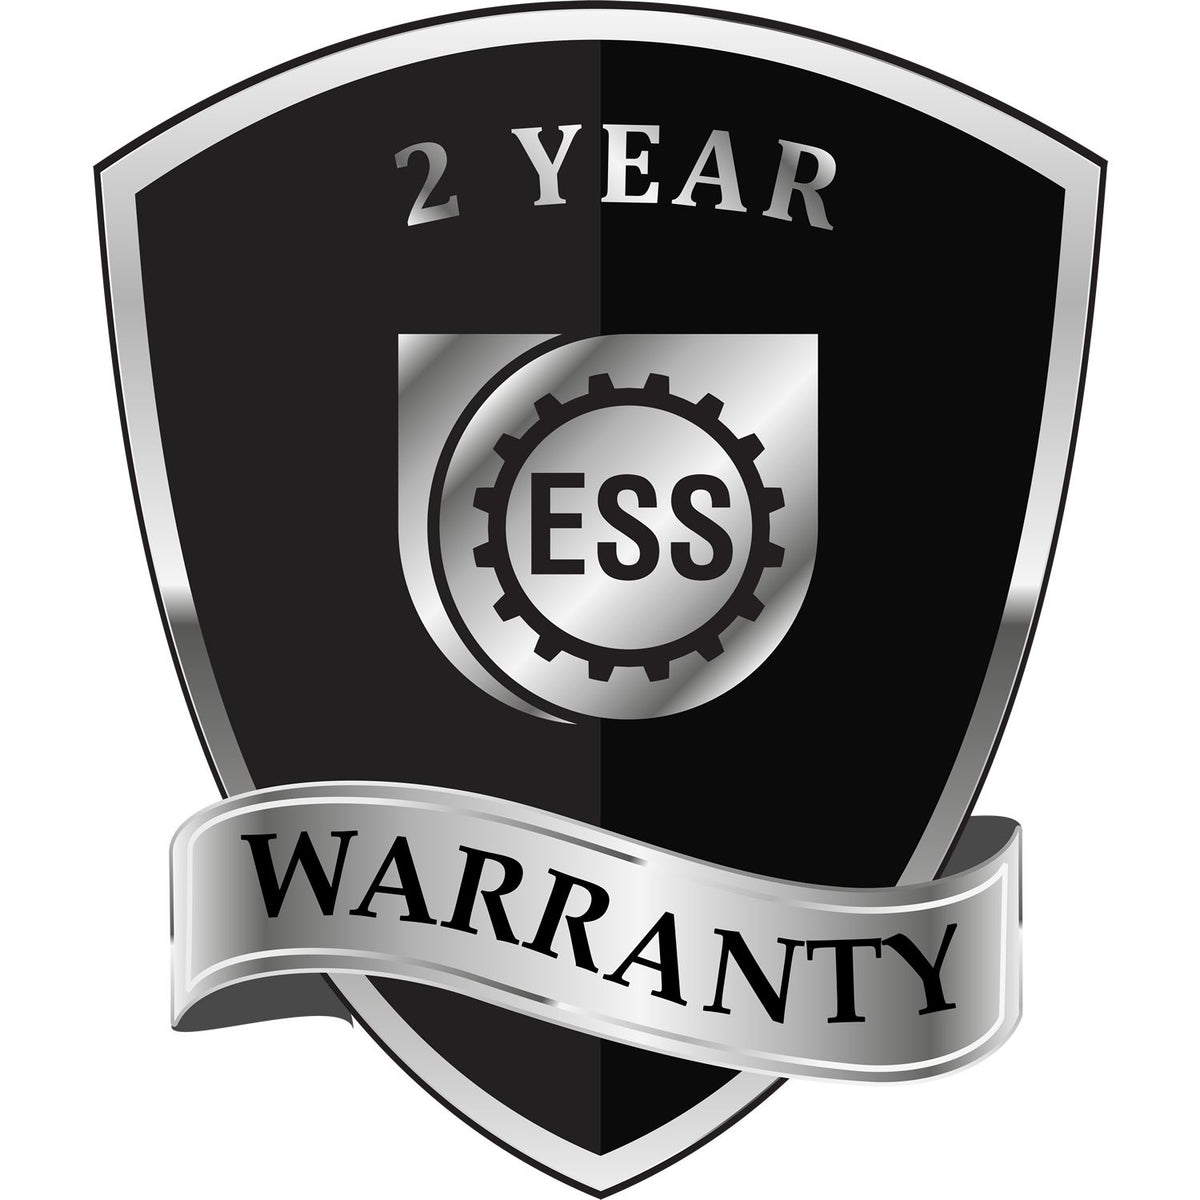 A badge or emblem showing a warranty icon for the Long Reach New York PE Seal